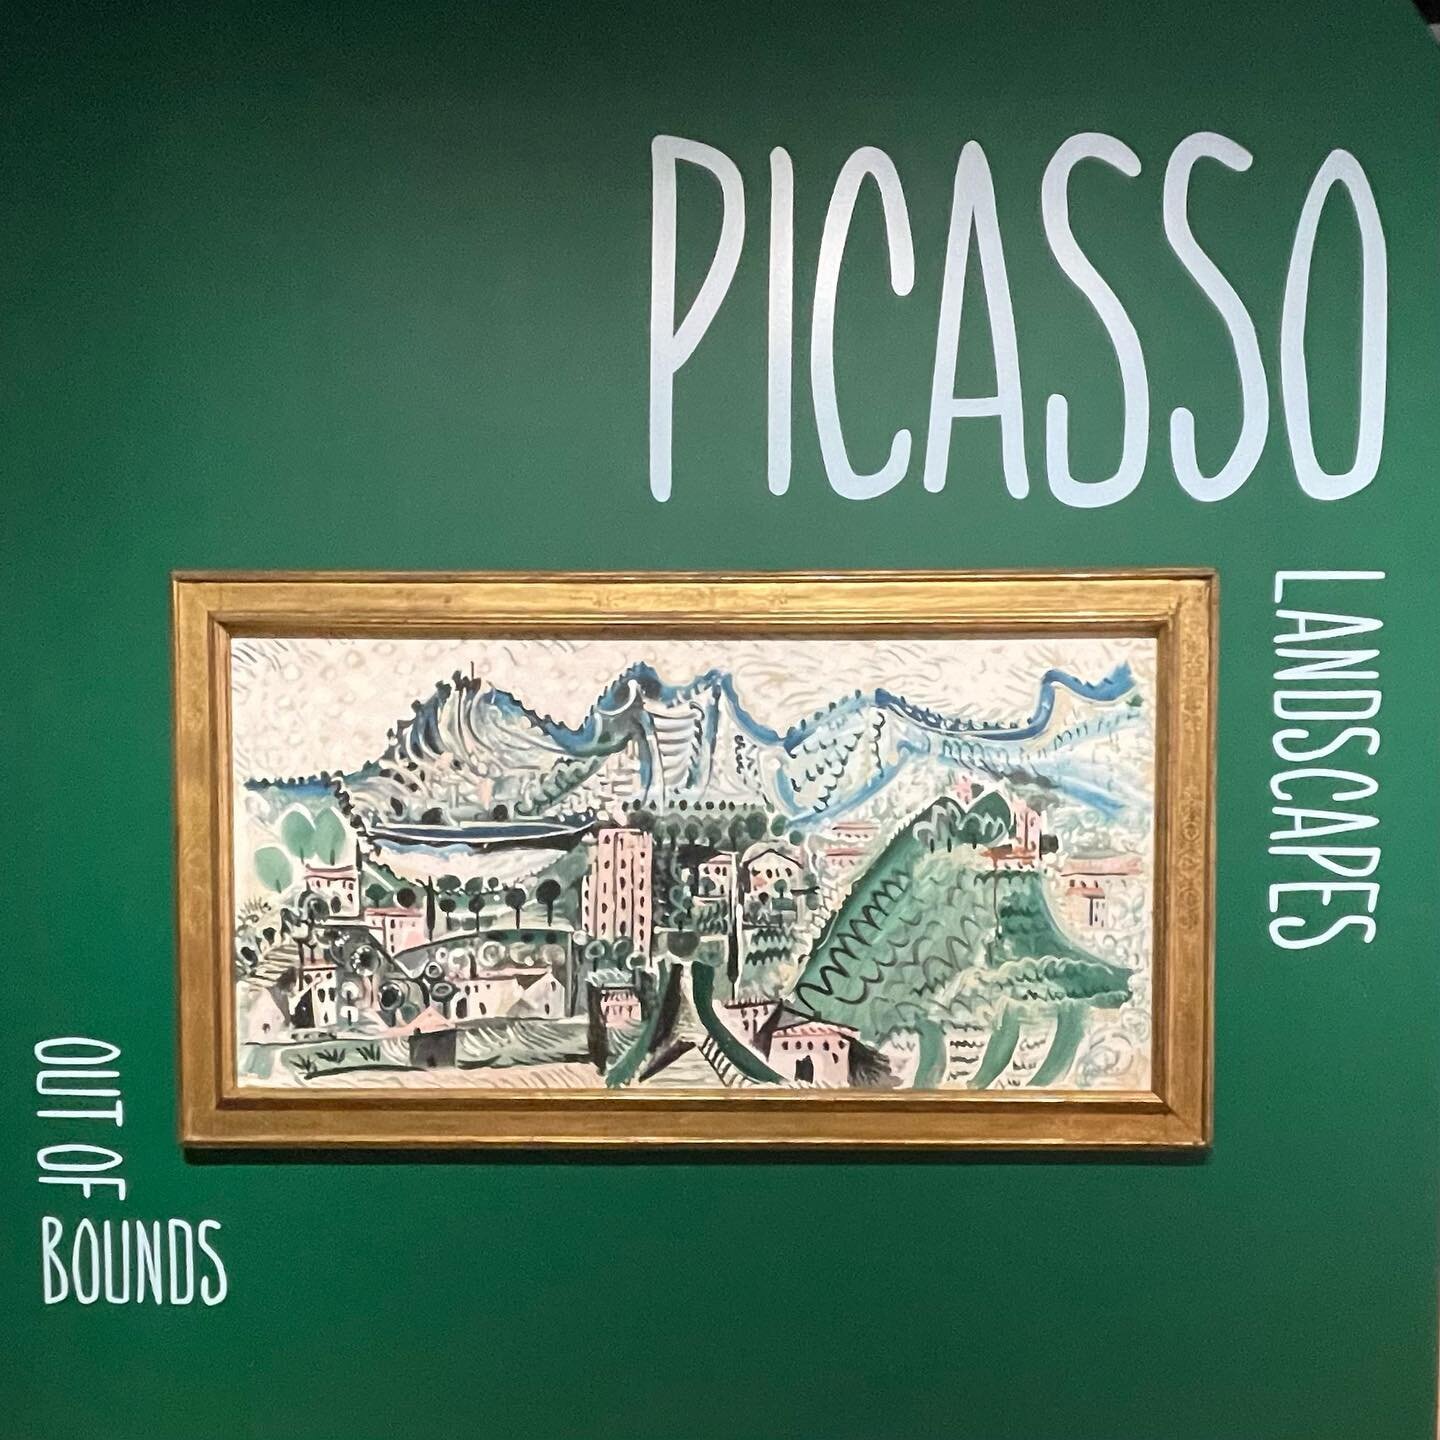 Opening tomorrow! &ldquo;Picasso Landscapes: Out of Bounds&rdquo; @themintmuseum 

On view through May 21st

#picasso #exhibition #cltarts #cubism #landscapes #pablopicasso #museum